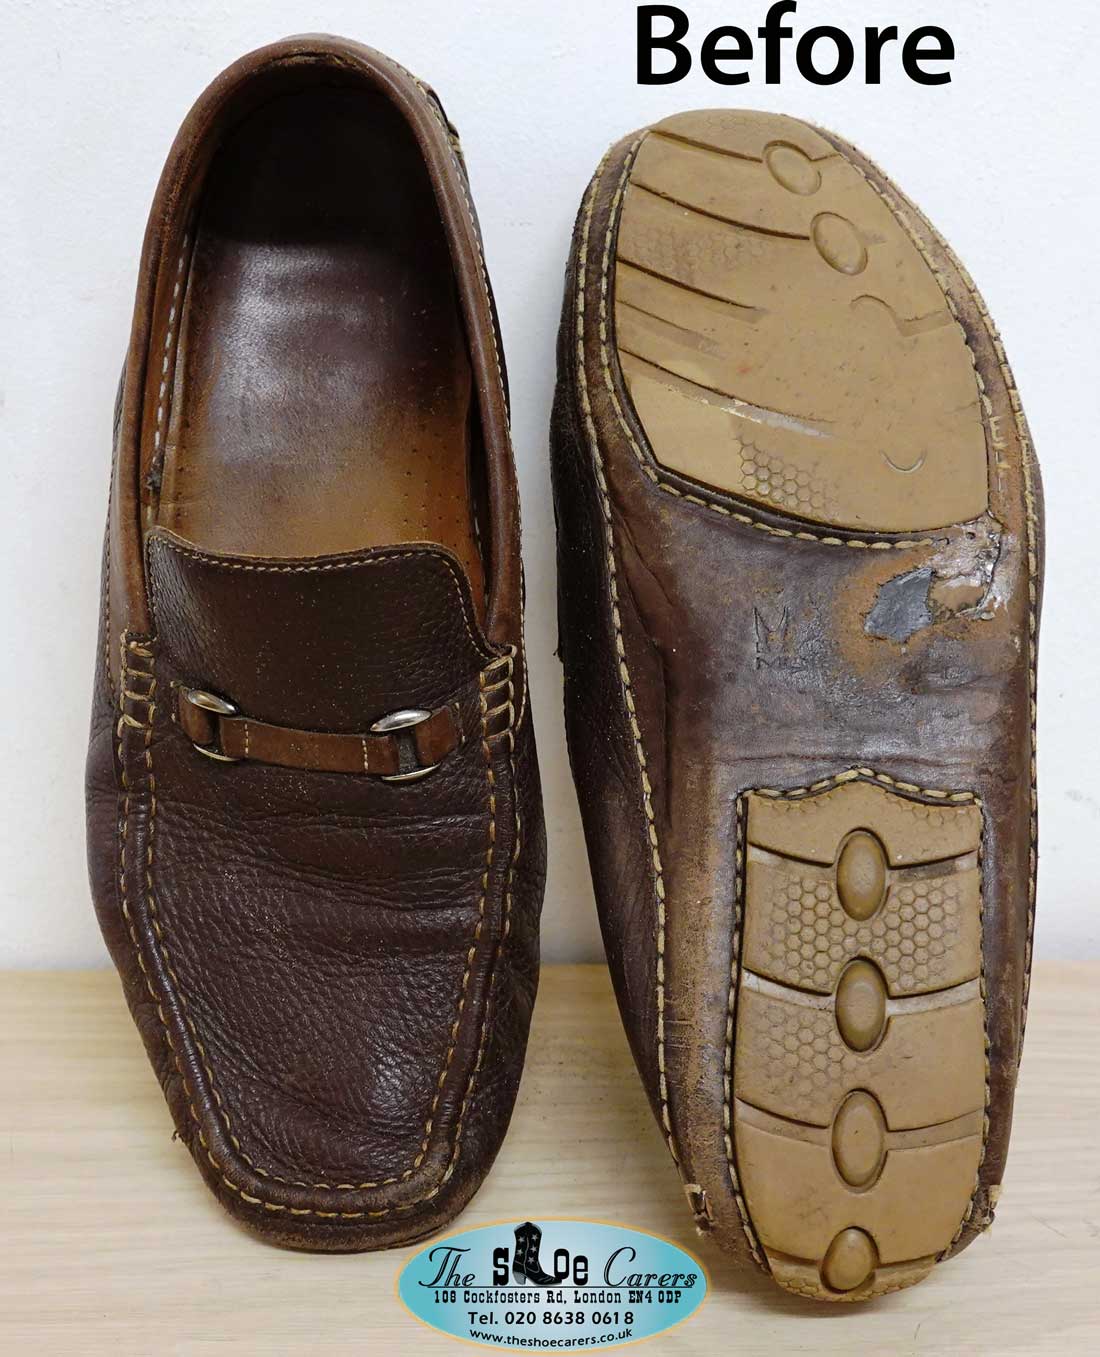 Moreschi loafers restored – The Shoe Carers